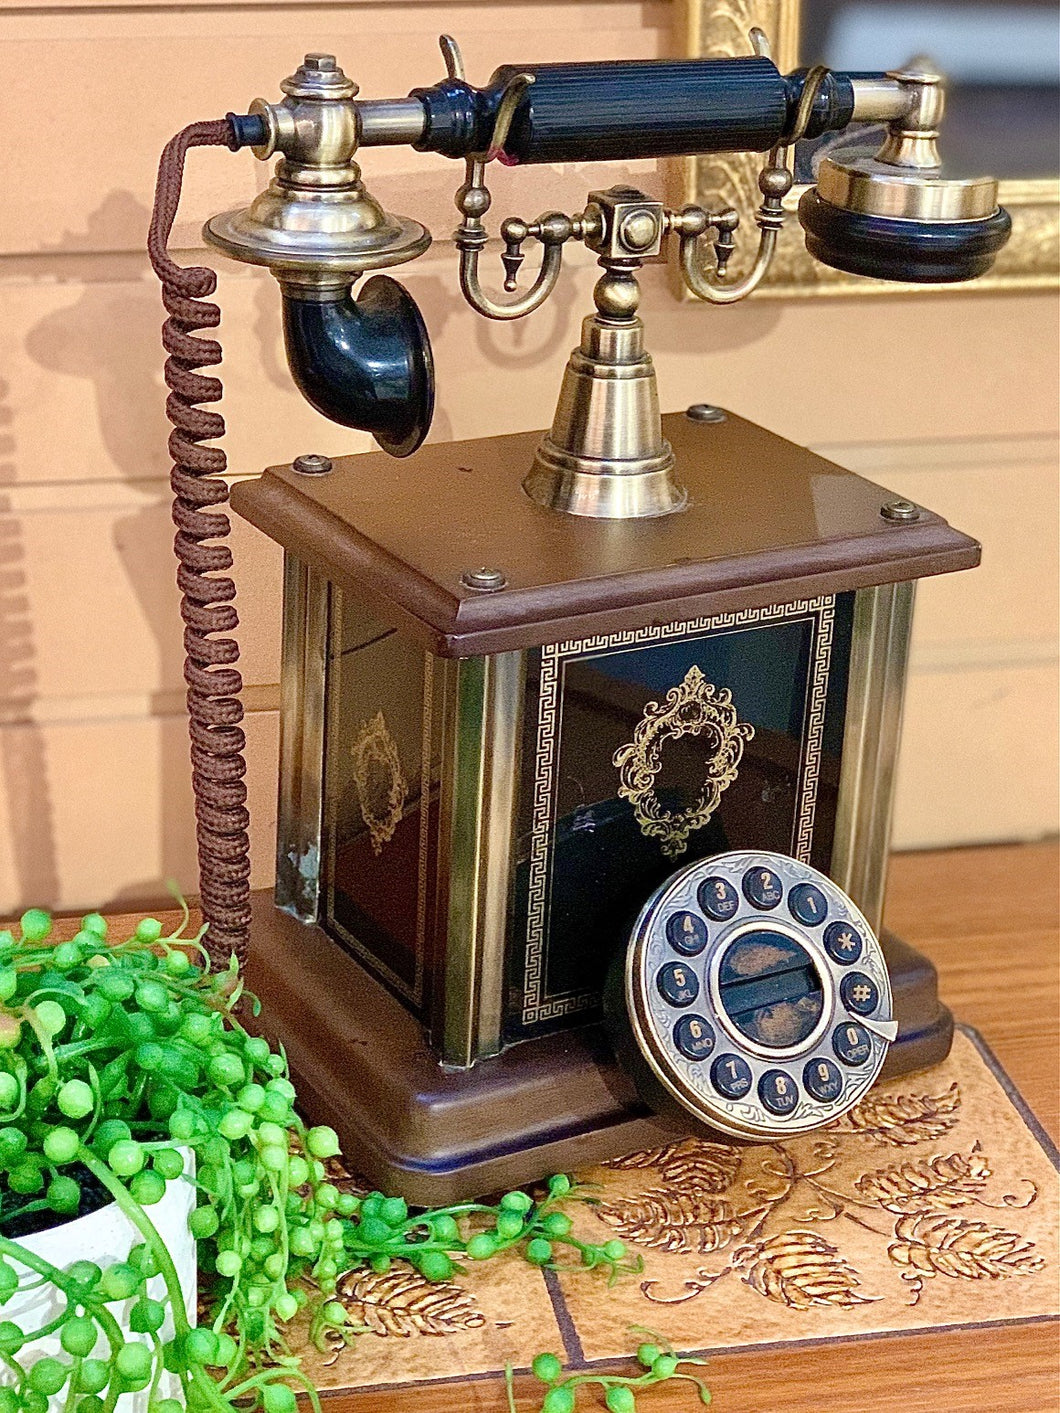 Telephone 1901 Reproduction